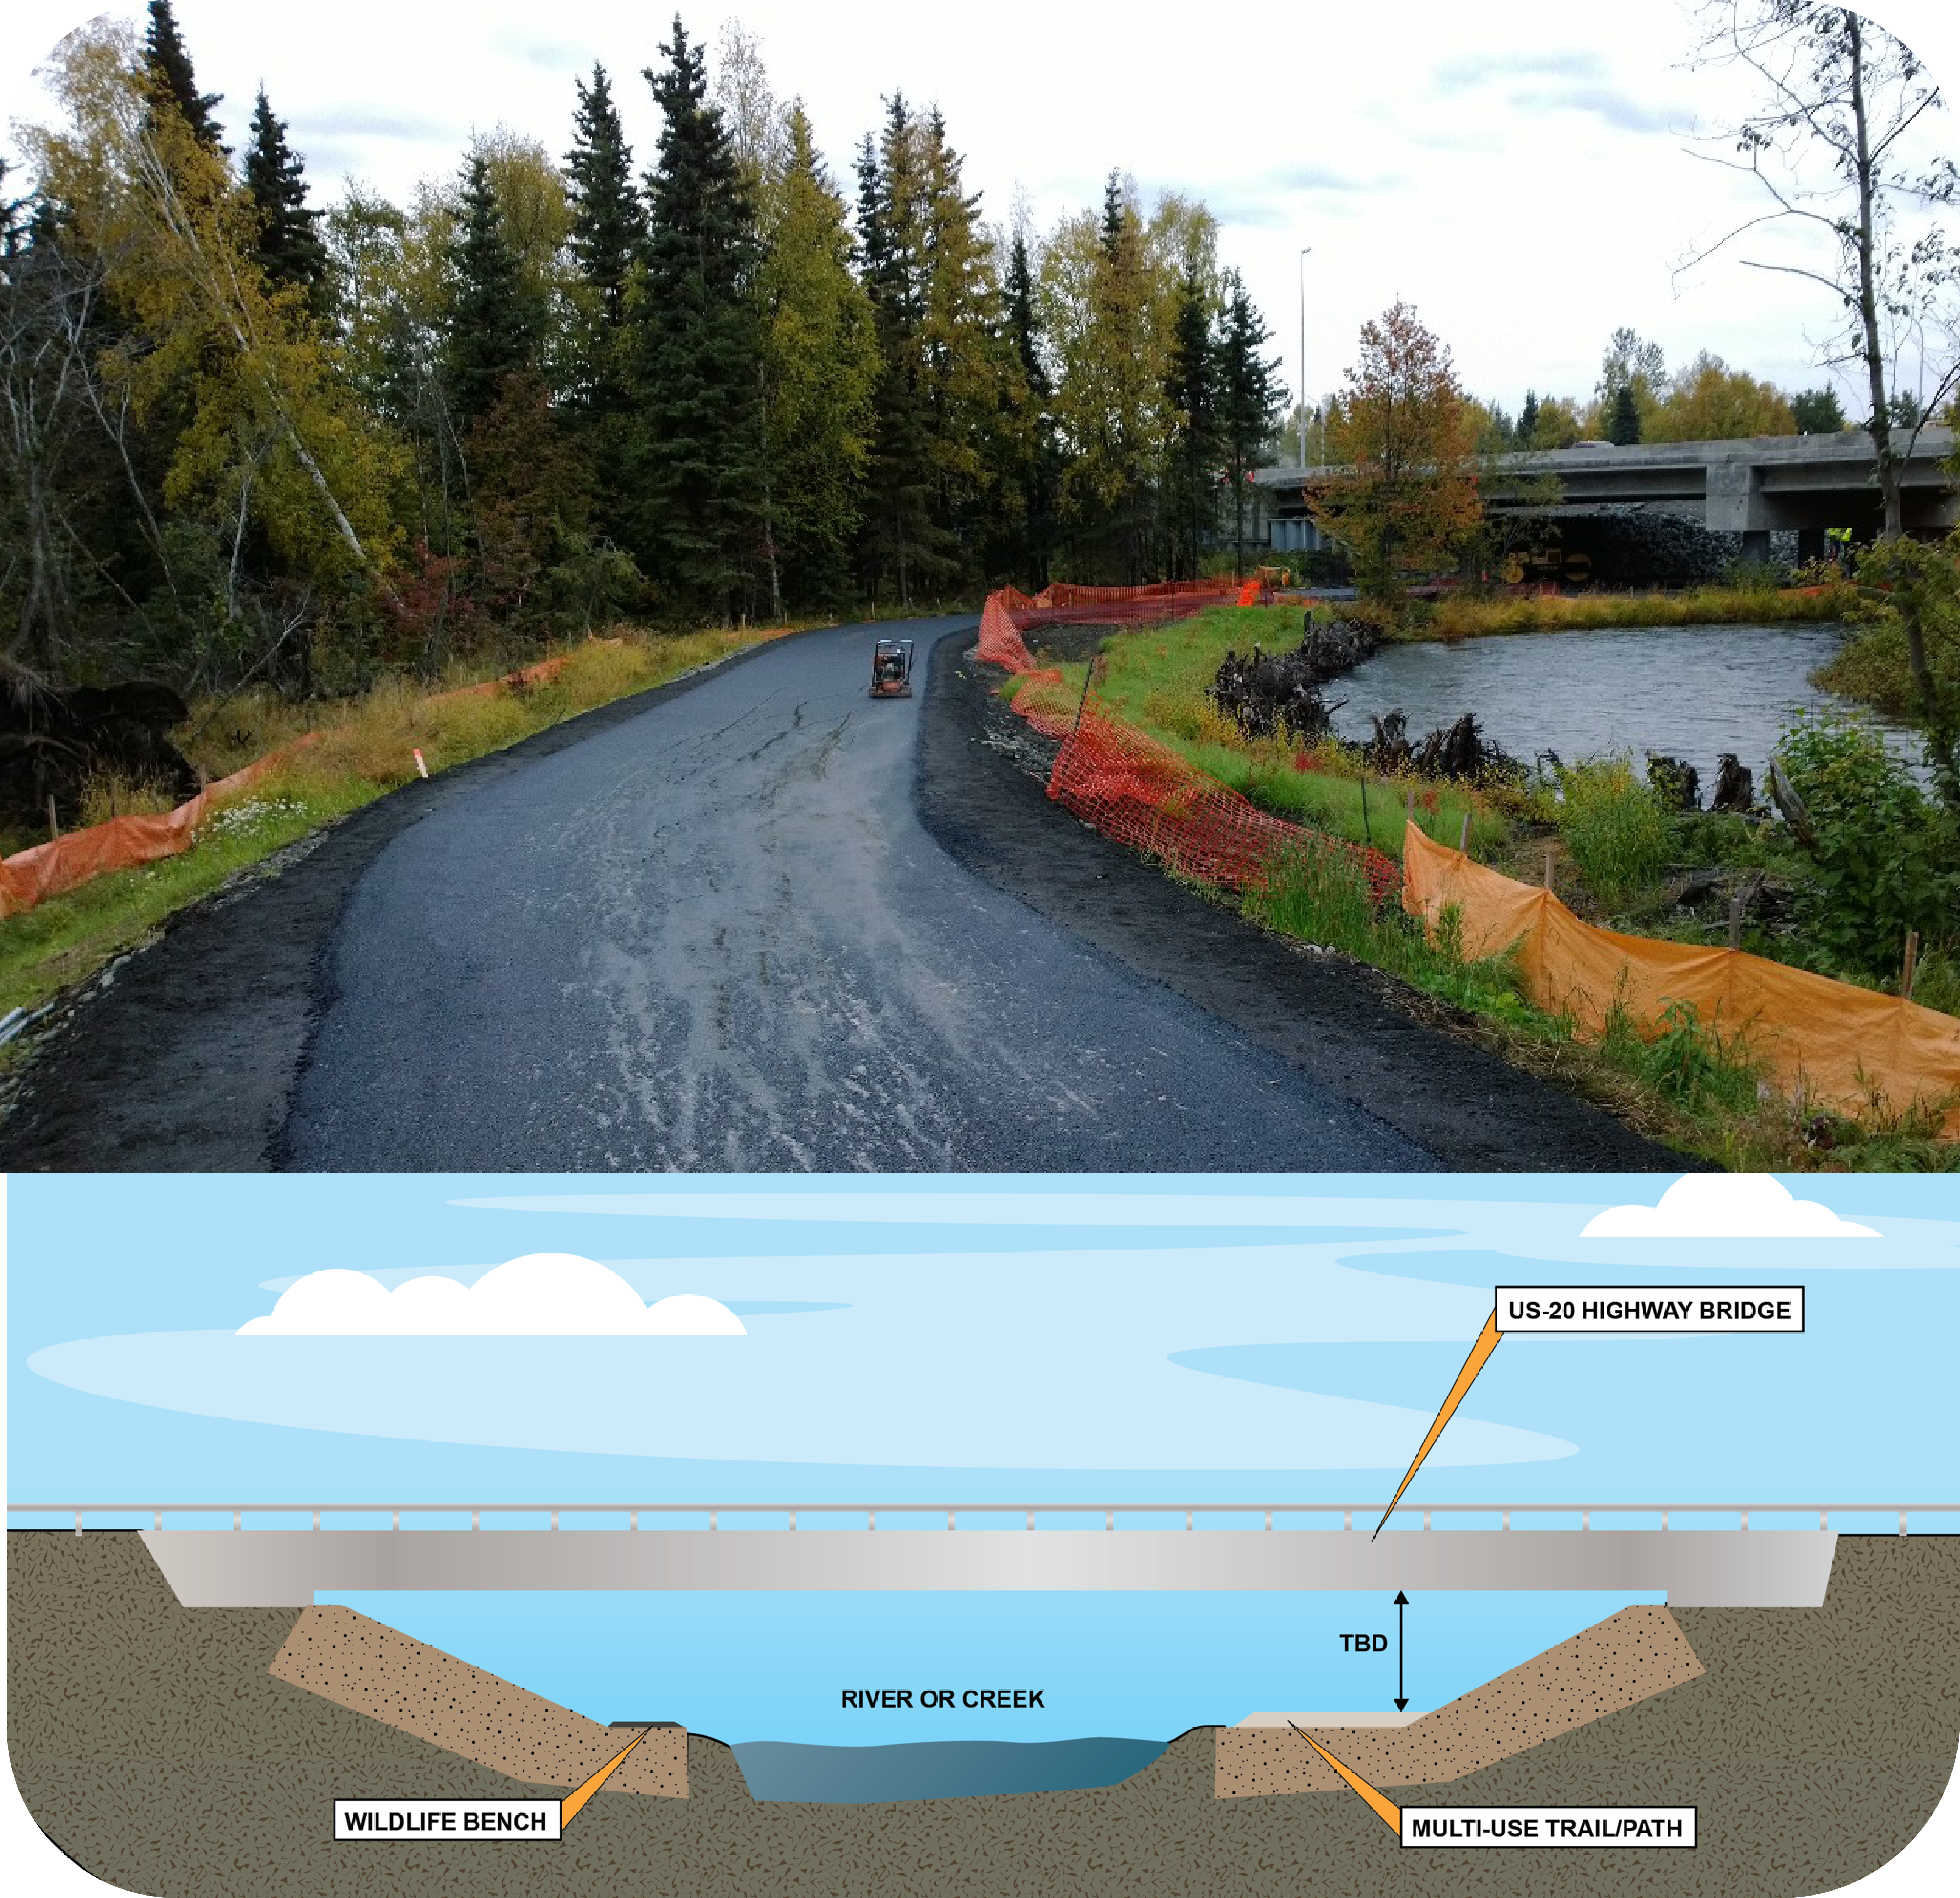 Photograph of pedestrian and bike trail at the side of a creek, both passing under a bridge. Below is a detailed graphic of the US-20 Highway bridge crossing a river with a wildlife bench, multi-use trail/path and the hight of the space under the bridge yet to be determined.